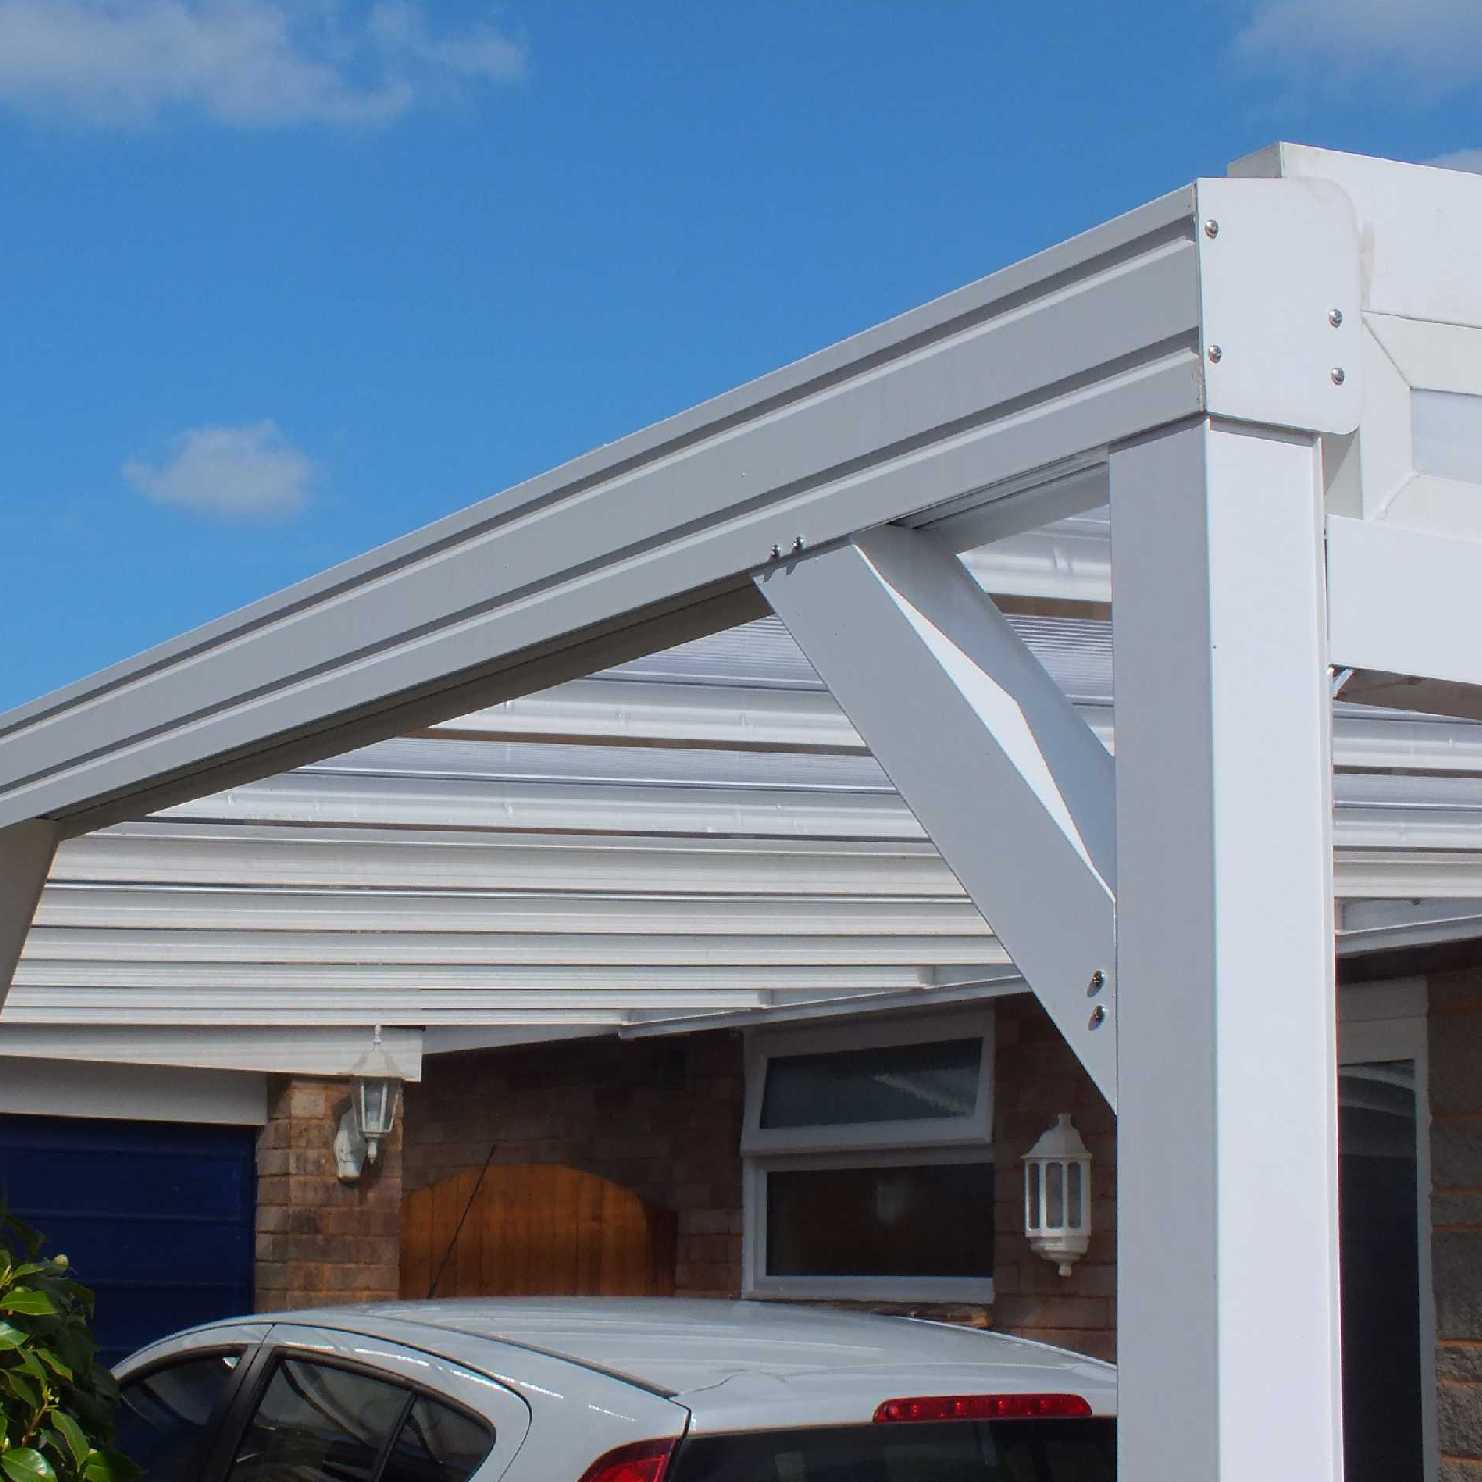 Great deals on Omega Smart Lean-To Canopy, White with 16mm Polycarbonate Glazing - 12.0m (W) x 4.5m (P), (5) Supporting Posts